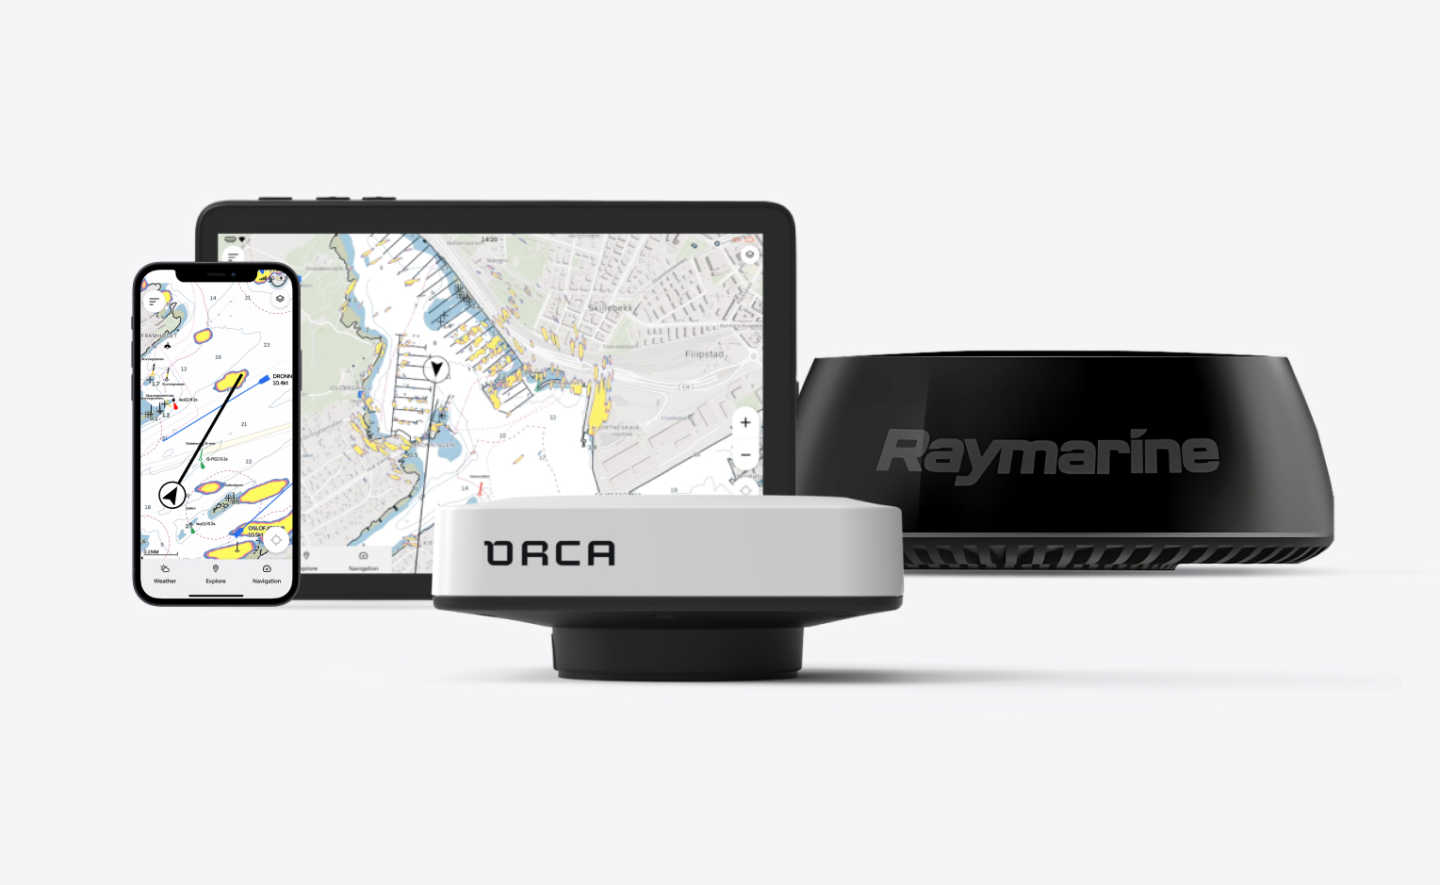 Meet Orca Core 2 with Radar support